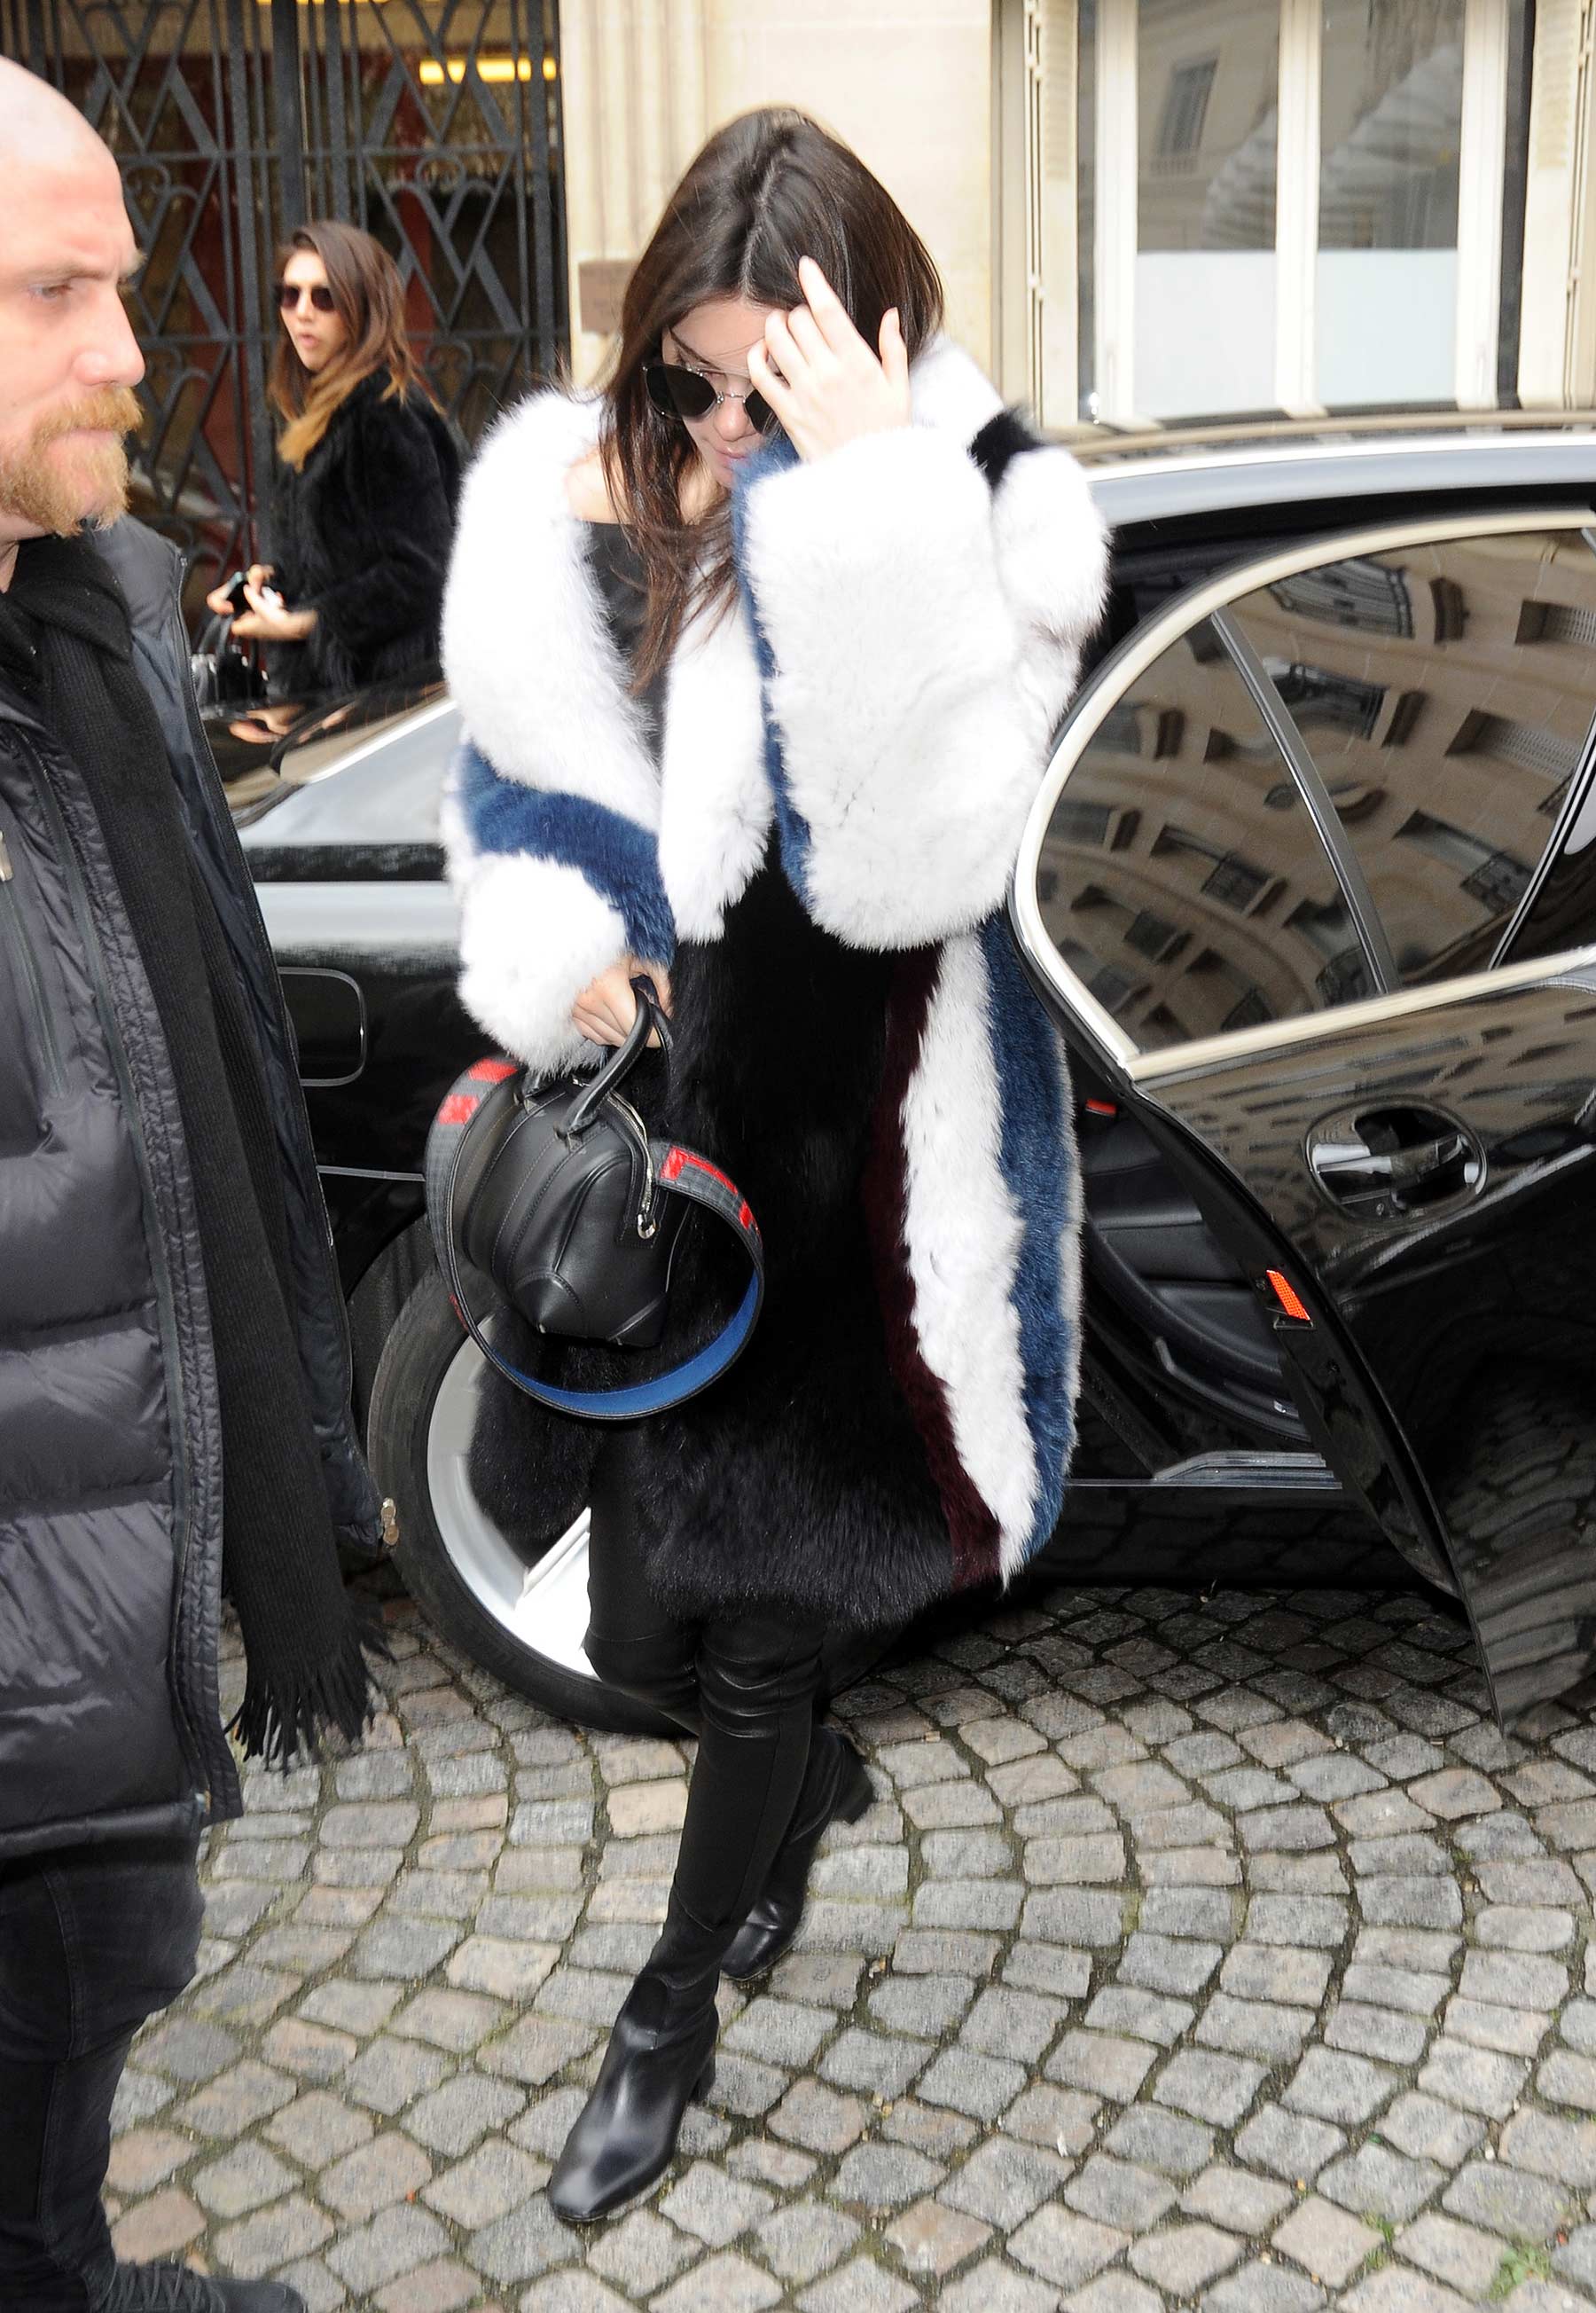 Kendall Jenner arriving at the Balmain Fashion Show